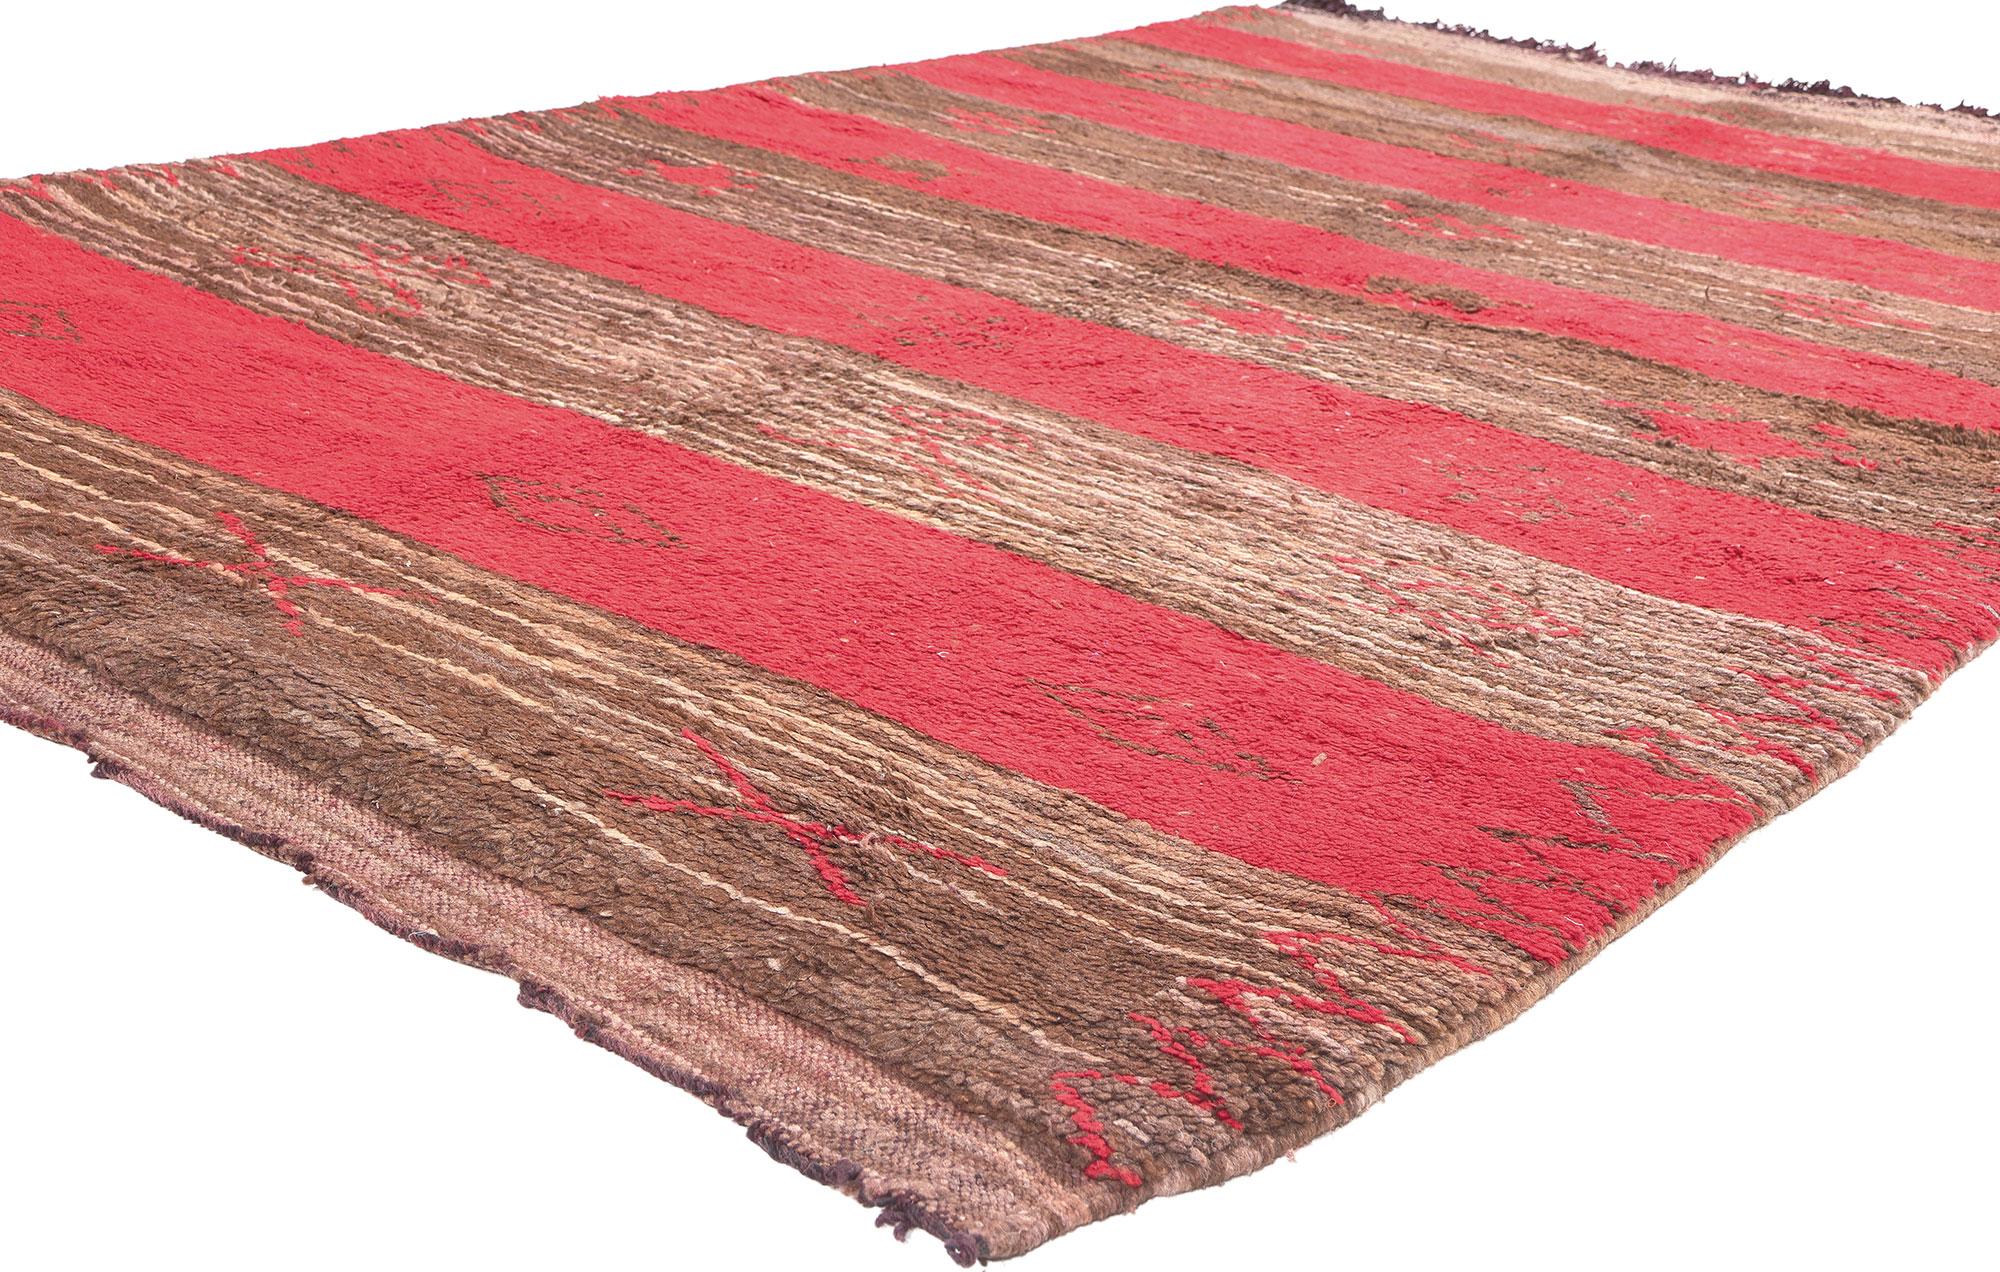 20396 Vintage Striped Moroccan Rug, 05'04 x 08'01. 

Indulge in the welcoming embrace of this hand-knotted wool vintage Moroccan rug, a plush testament to woven beauty that adds a layer of warmth to nearly any space. The striped tribal design and